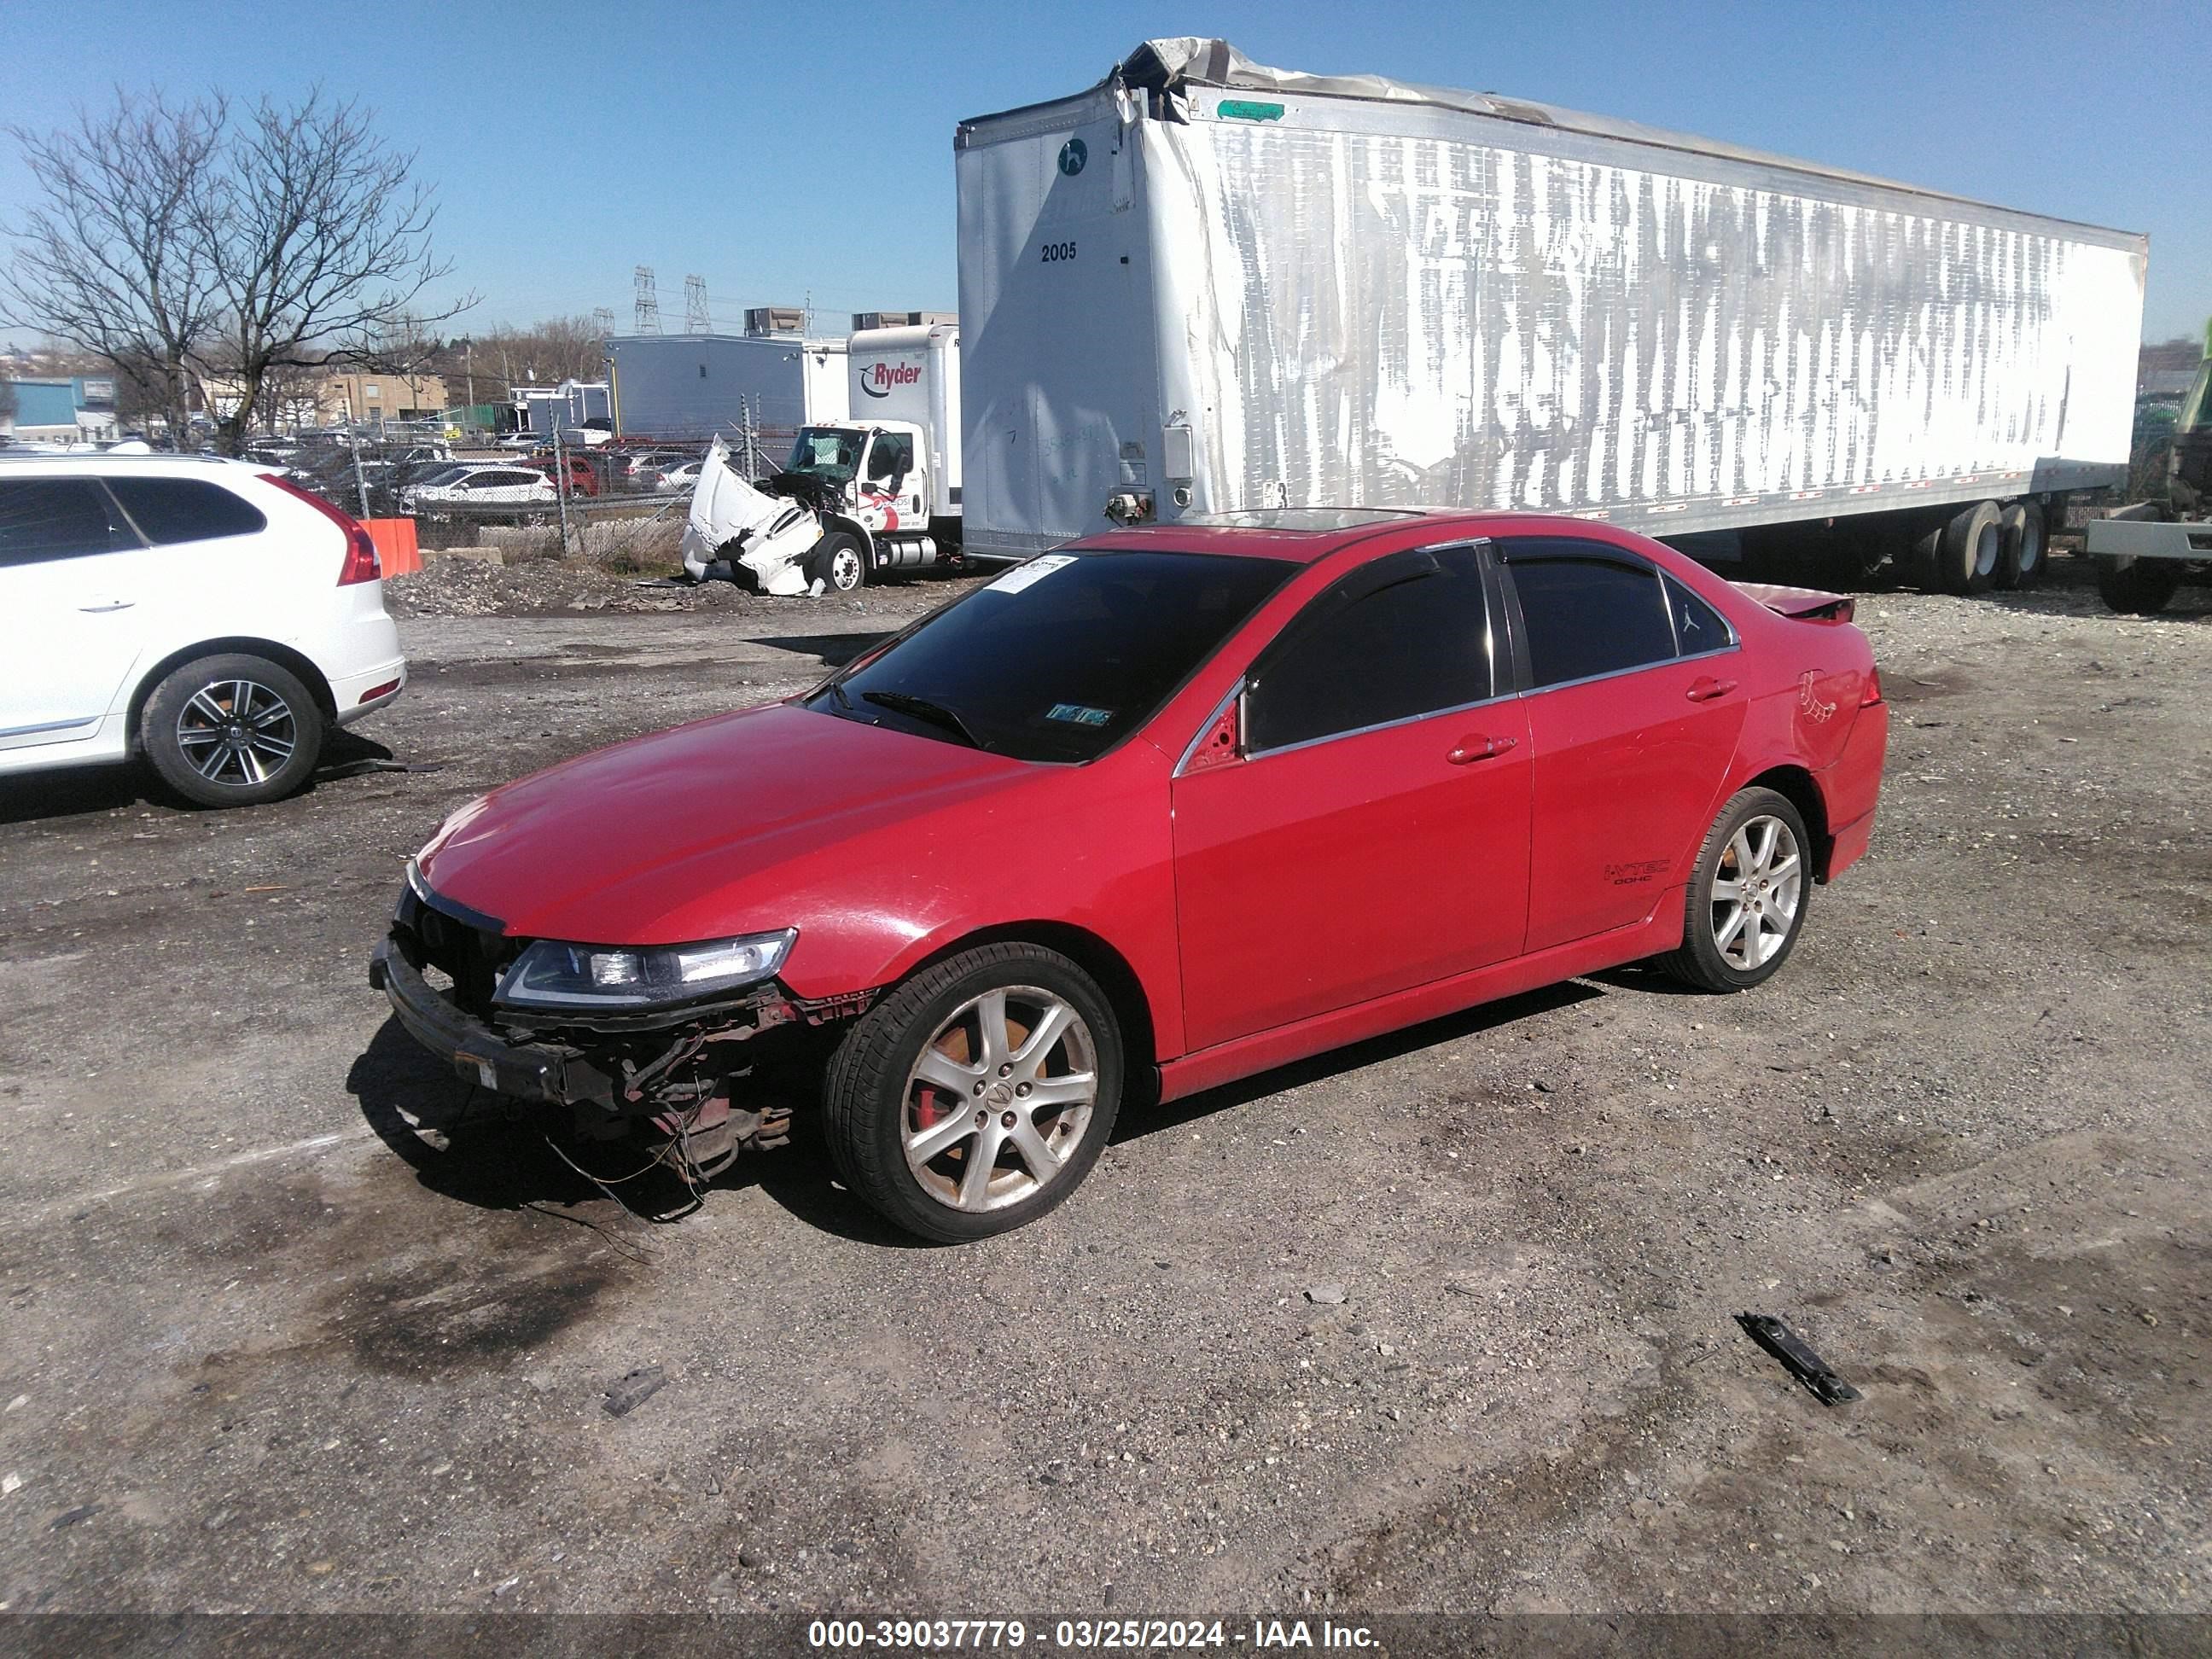 JH4CL96875C019218  - ACURA TSX  2005 IMG - 1